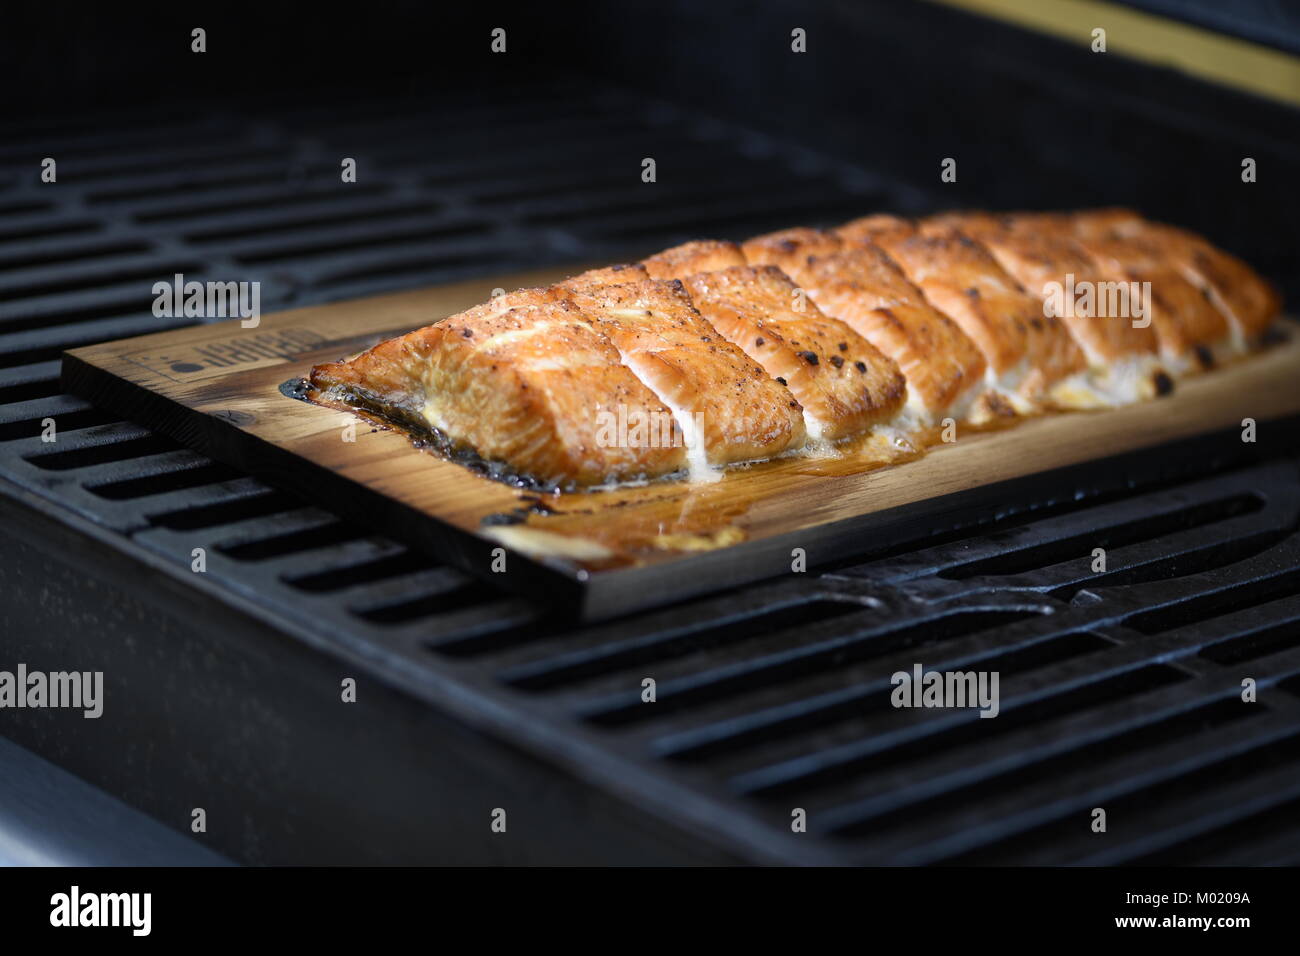 Salmon on a wood plank to give it smoked taste Stock Photo